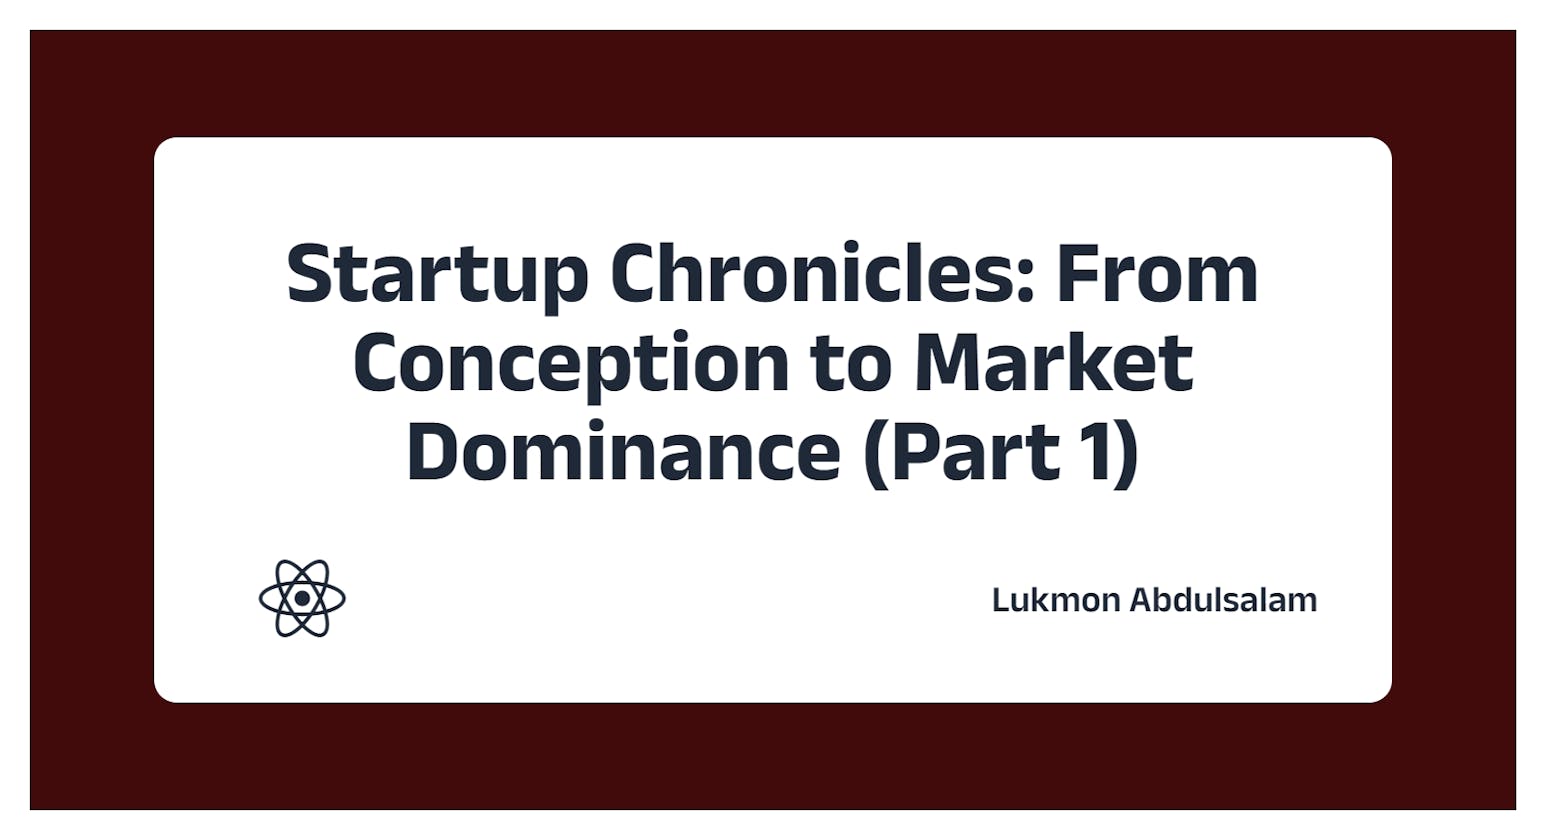 Startup Chronicles: From Conception to Market Dominance (Part 1)